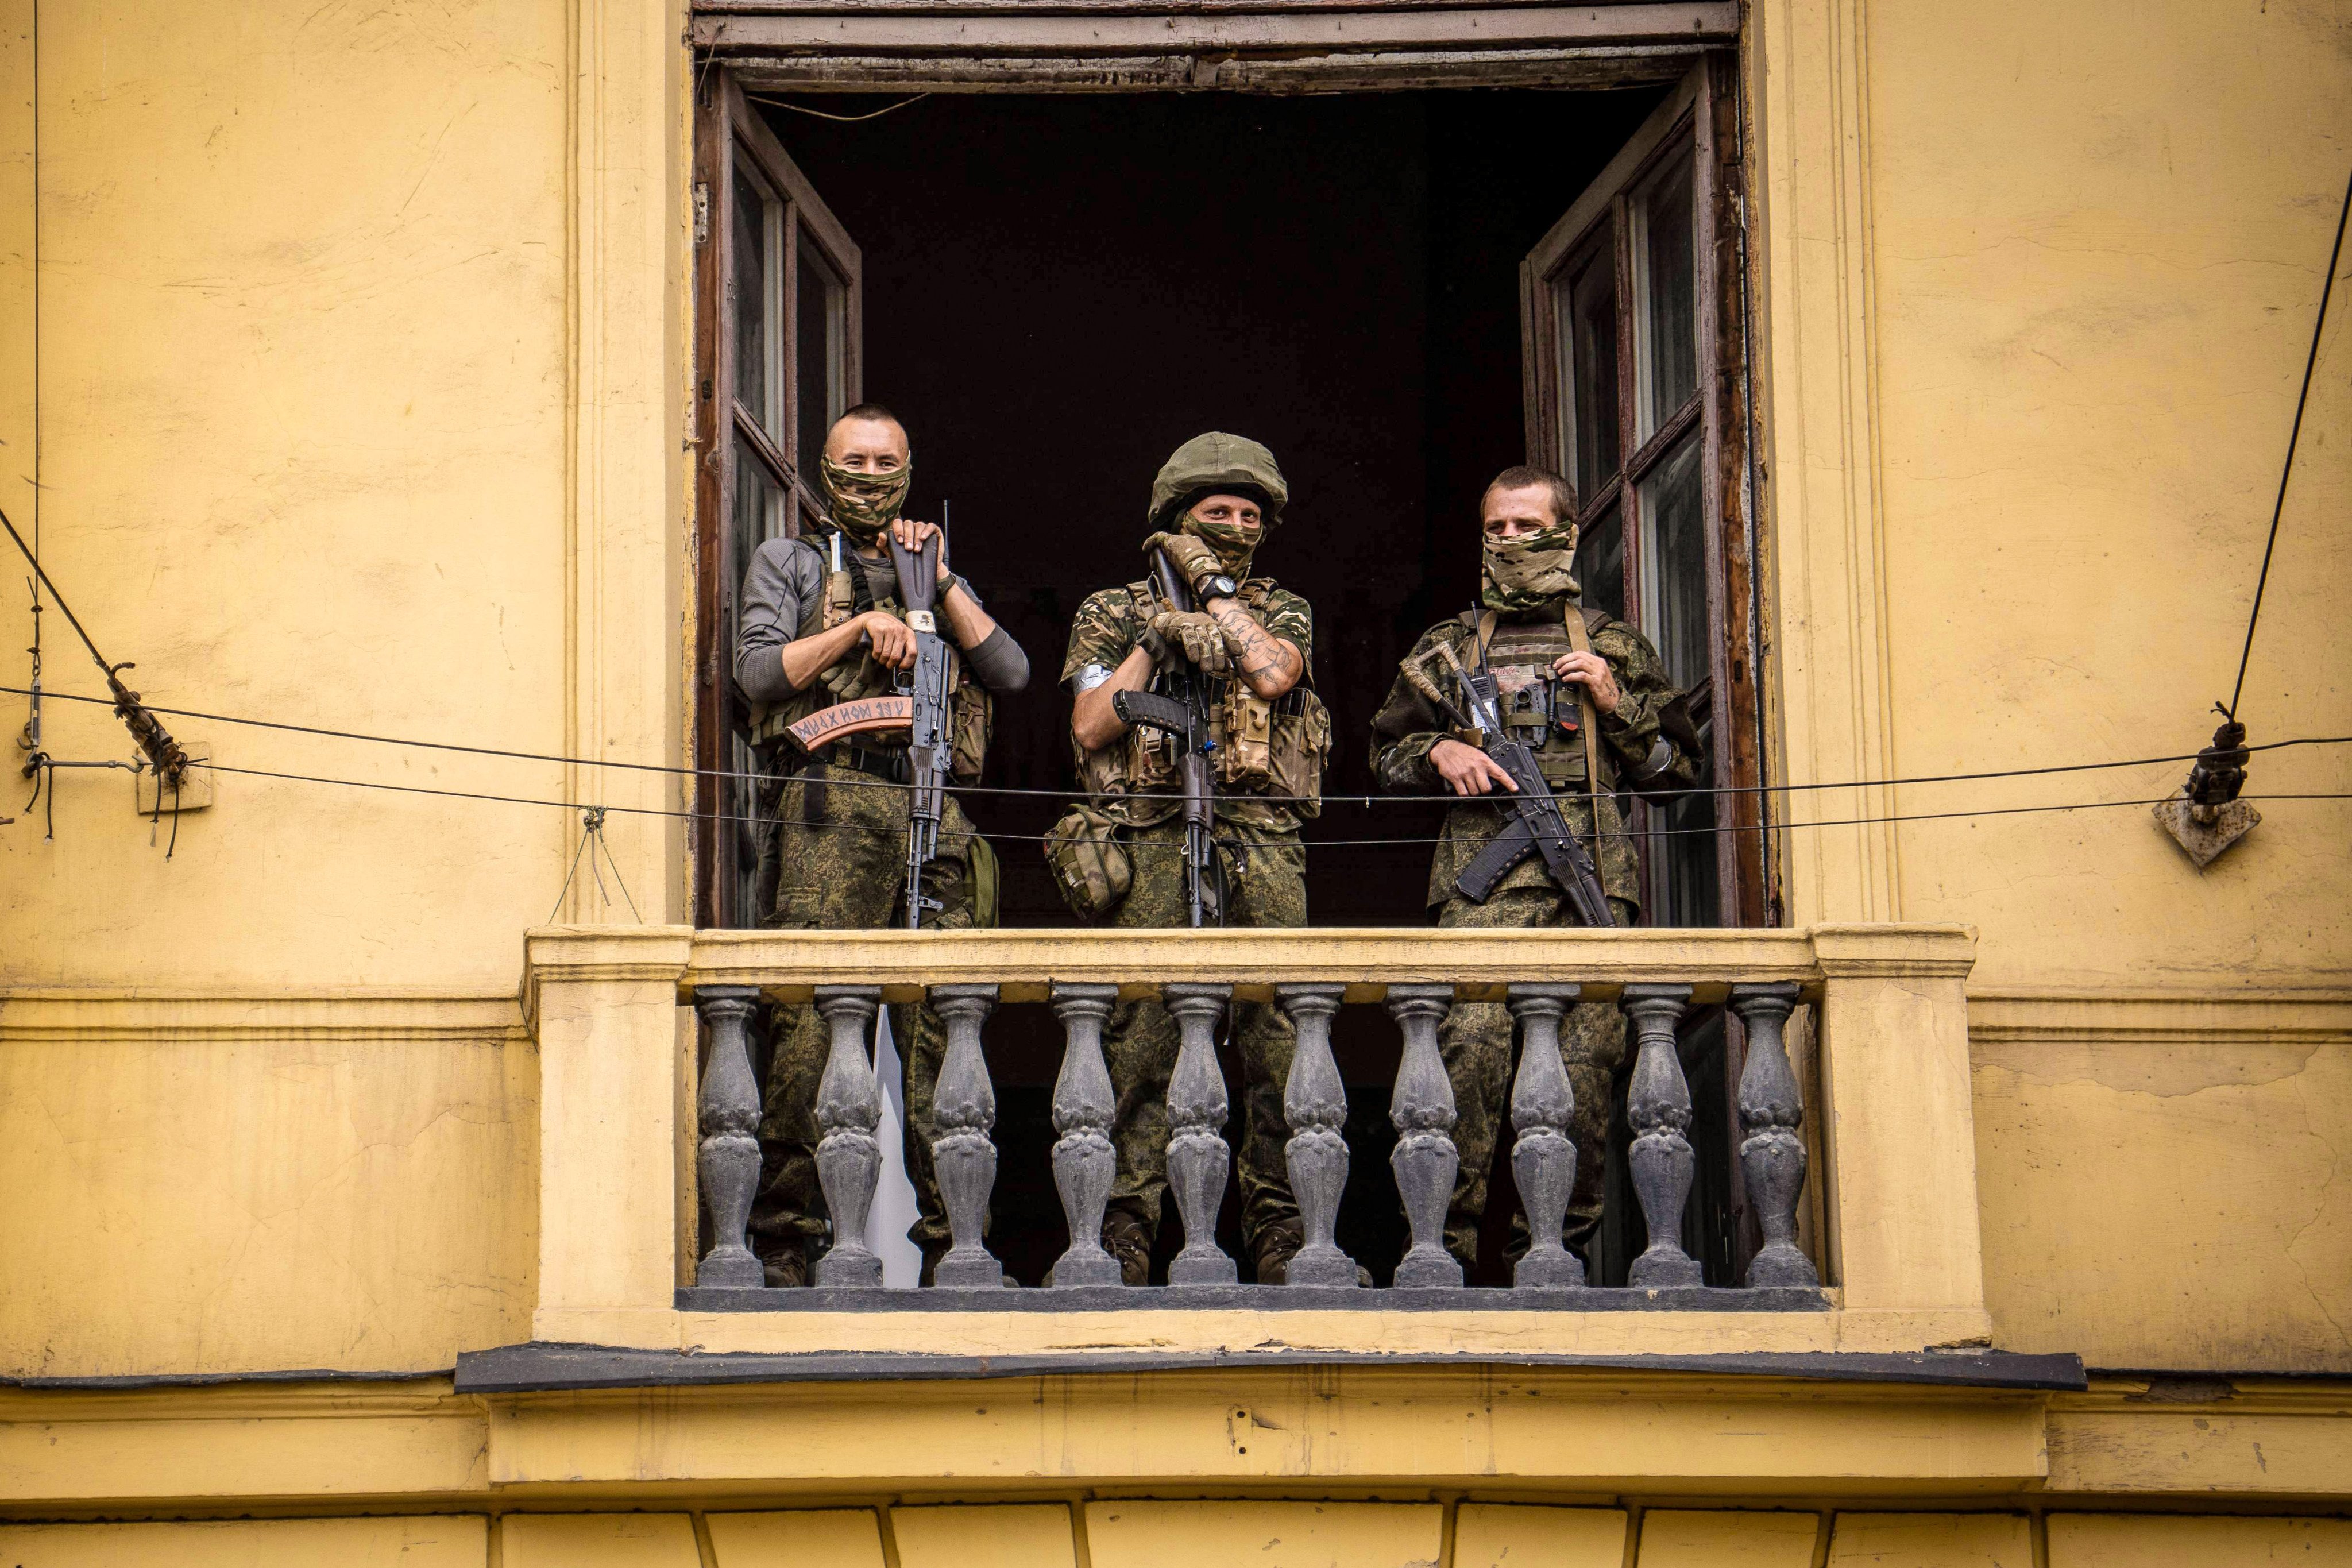 Wagner Group fighters in Russia on June 24. Digital mercenaries are expanding and remain relatively unnoticed compared to their boots-on-the-ground counterparts. Photo: AFP 